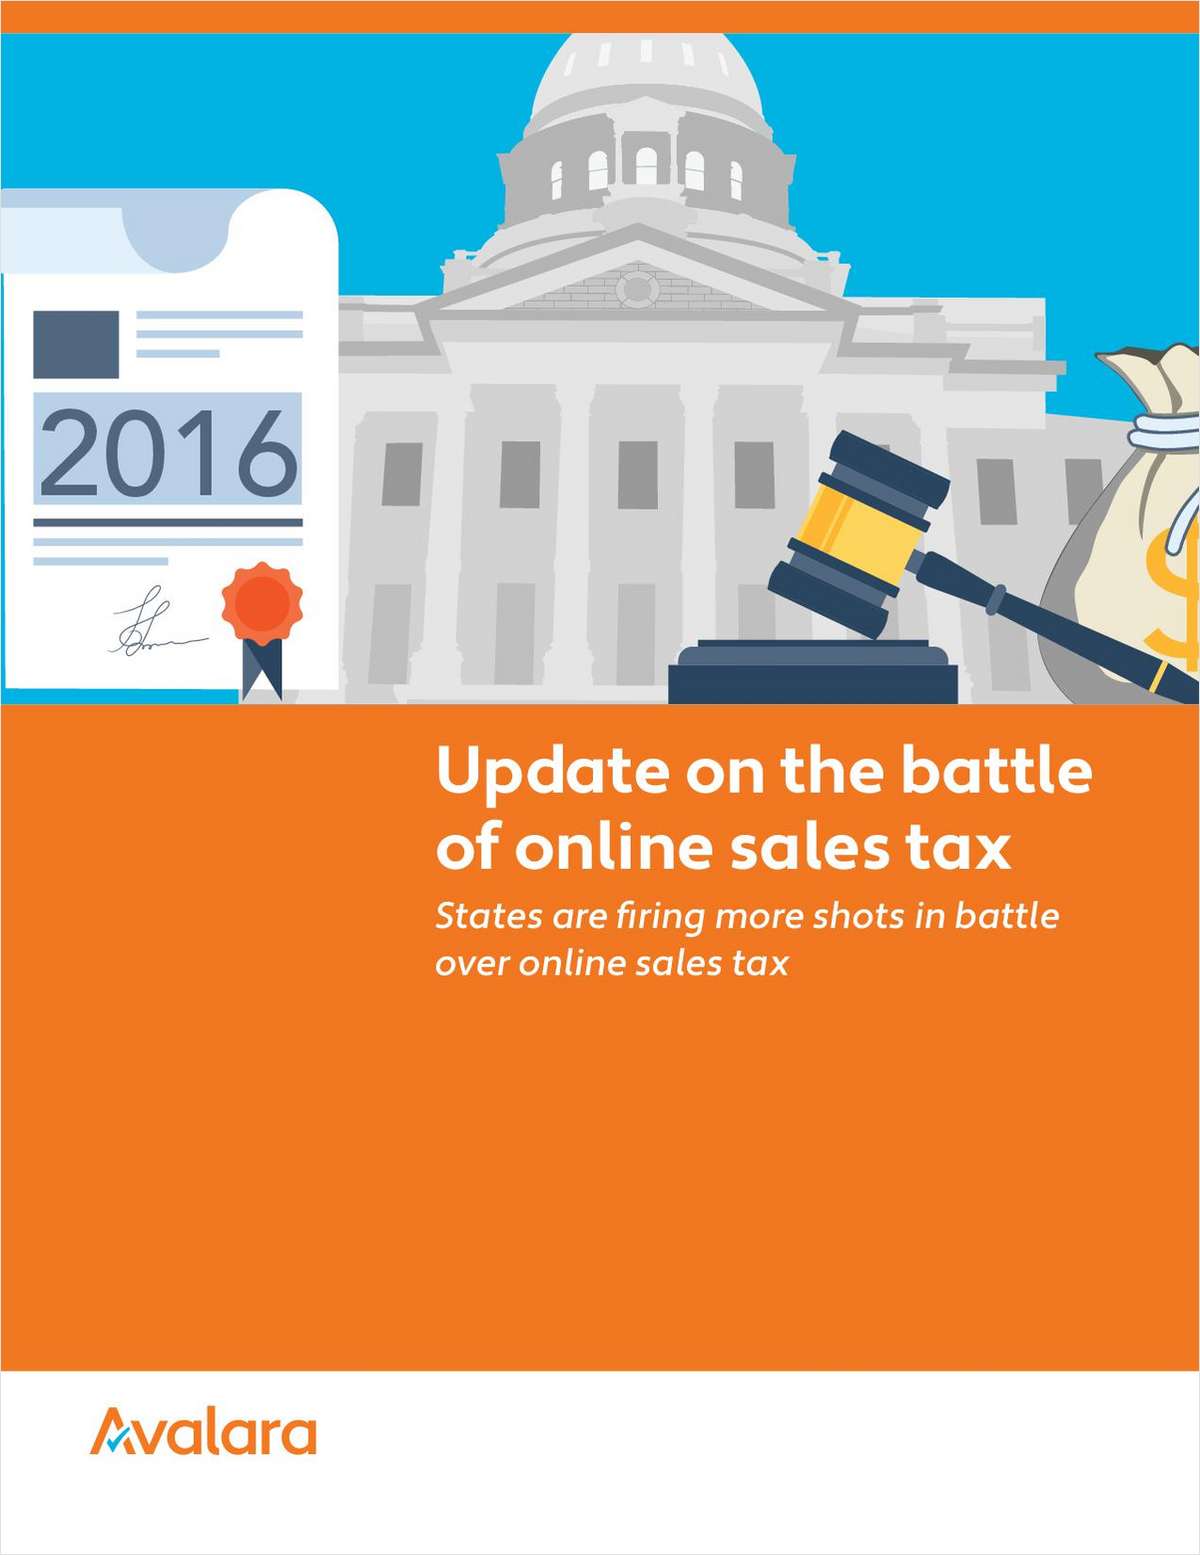 Update on the Battle of Online Sales Tax for Small Businesses